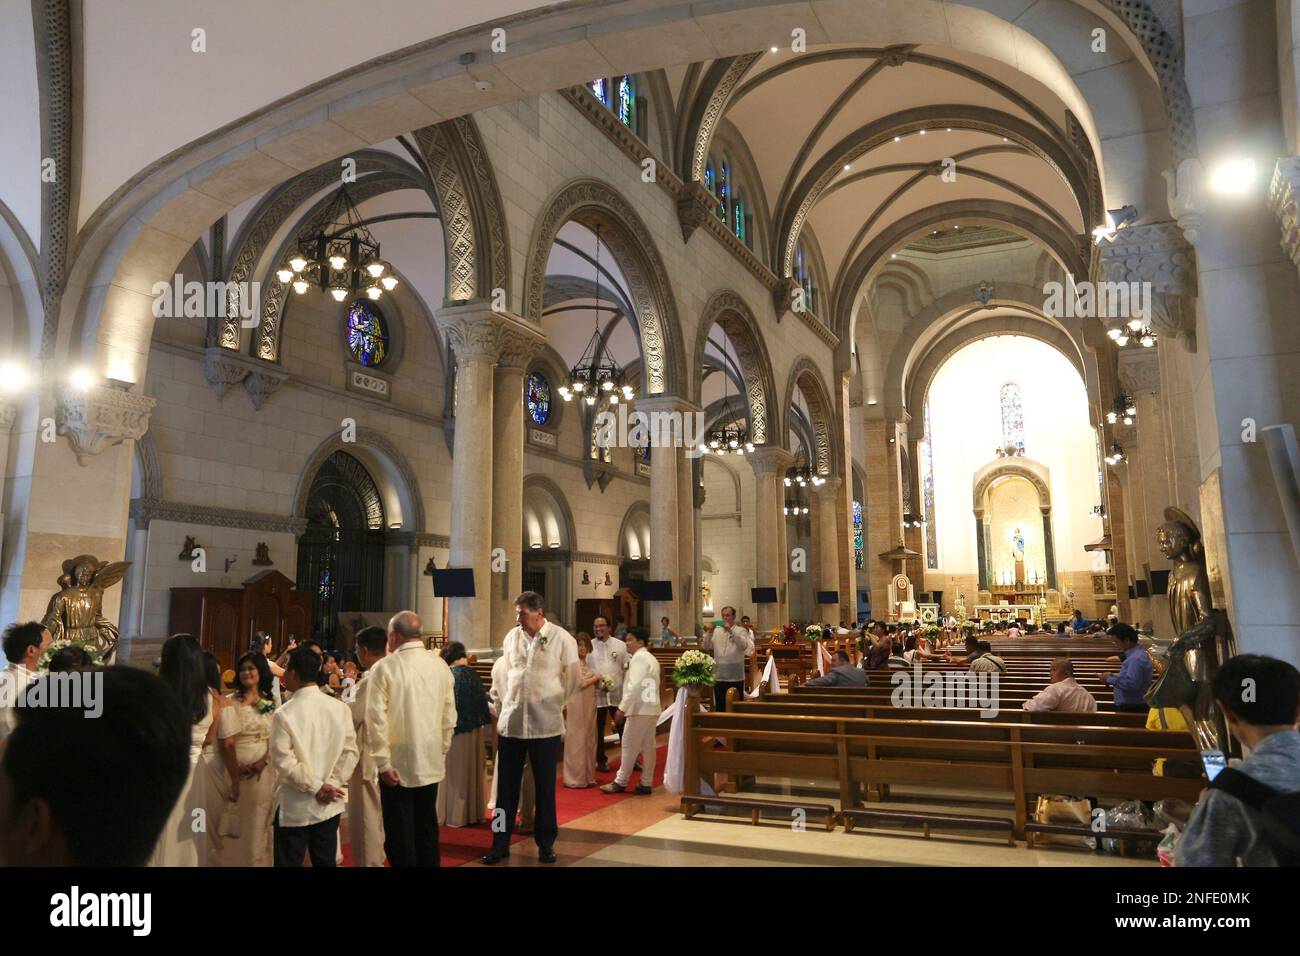 MANILA, PHILIPPINES - NOVEMBER 25, 2017: Interior view of Cathedral in Manila, Philippines. The church is located in Intramuros district. Full name: M Stock Photo